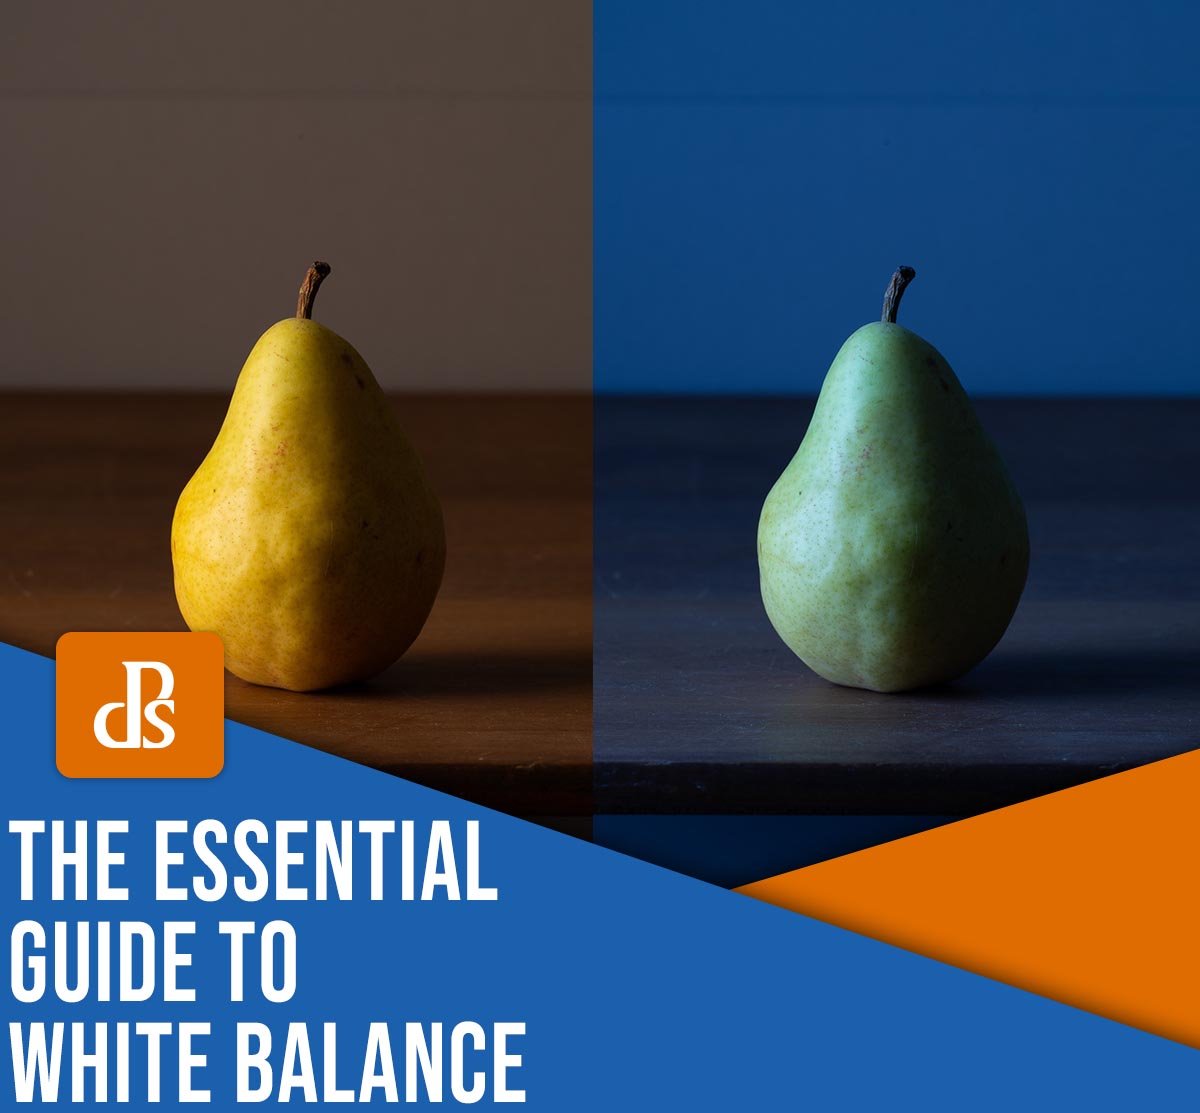 The essential guide to white balance in photography